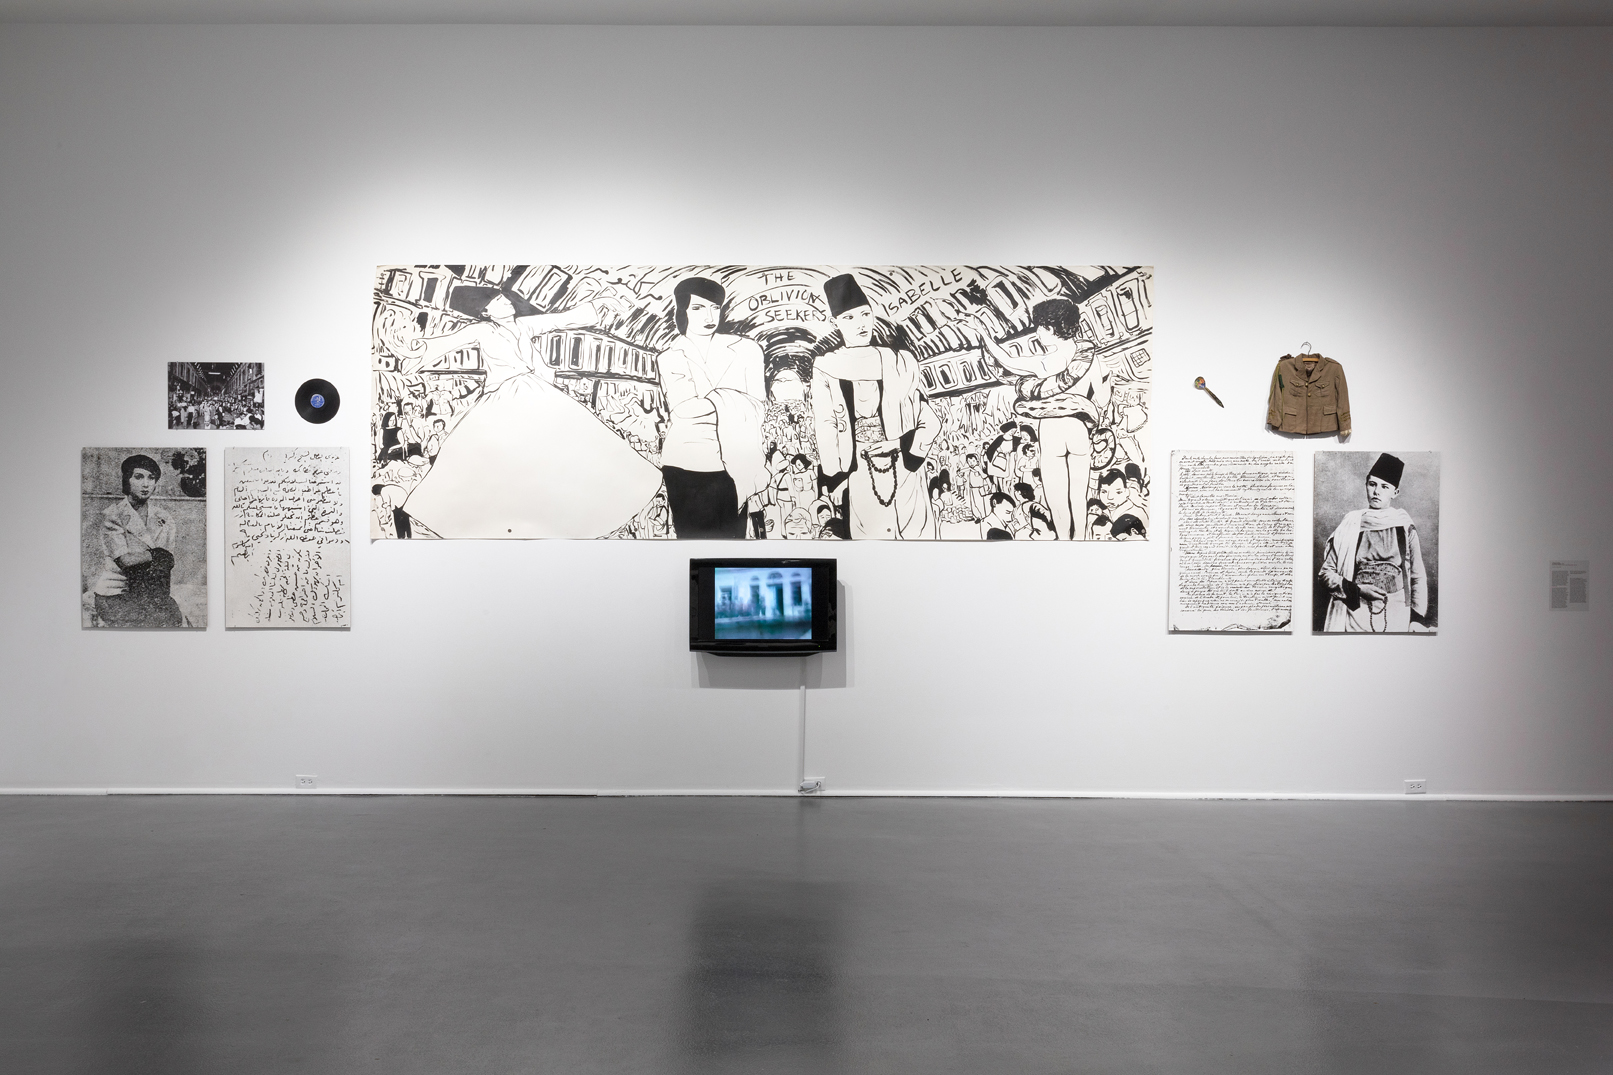 Installation view of The Oblivion Seekers, a multimedia installation of objects and small video arranged around a larger central black ink drawing